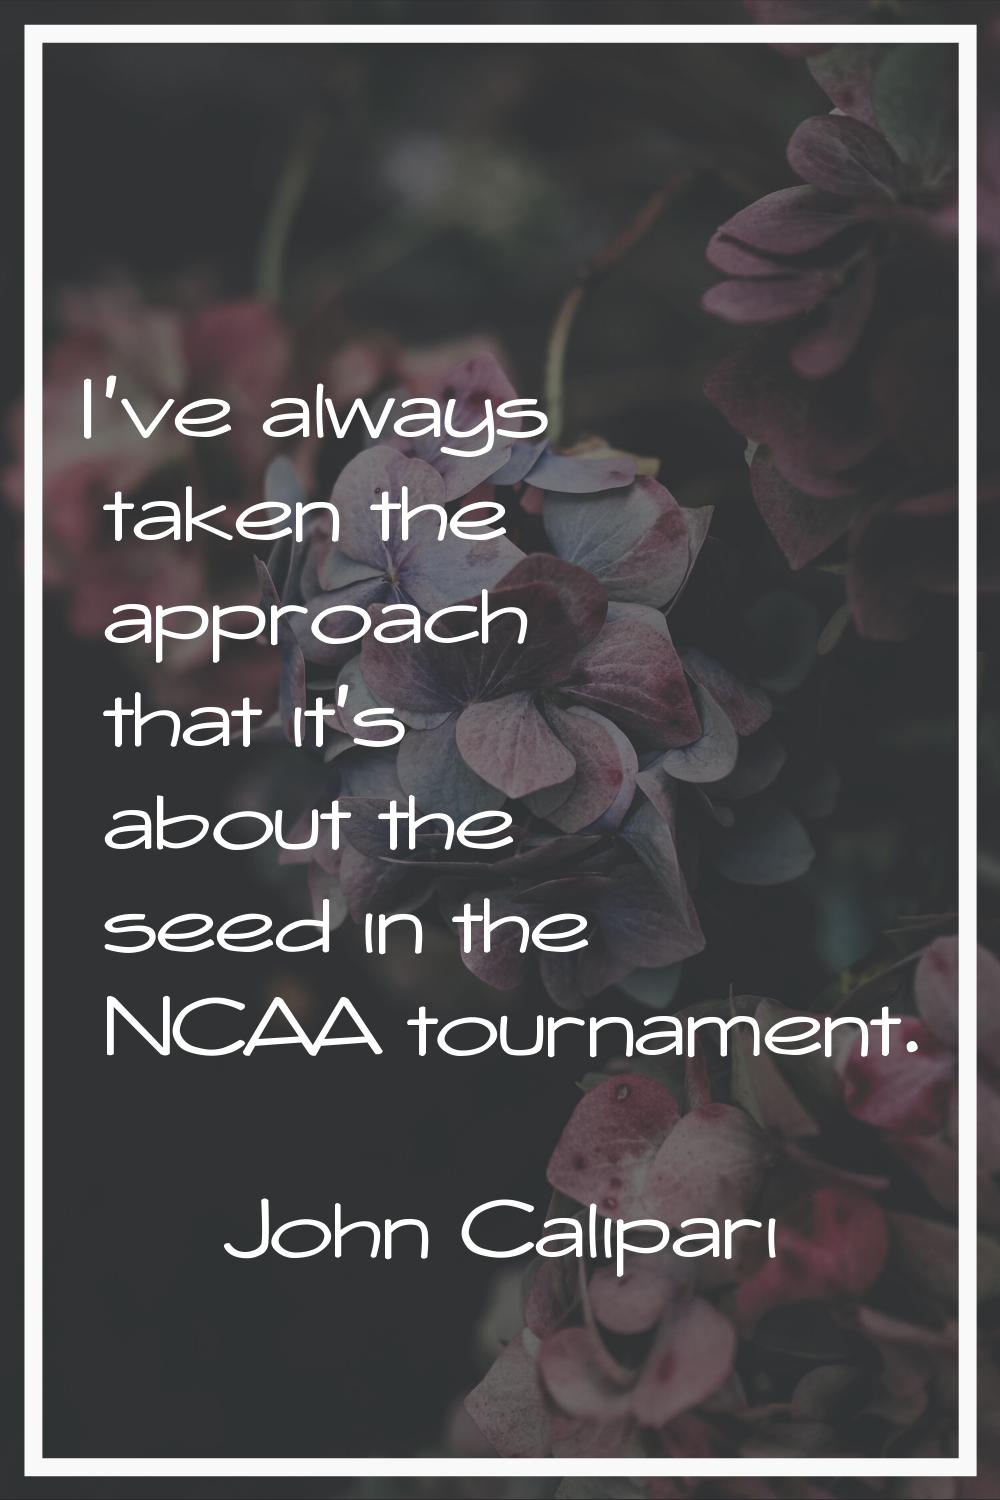 I've always taken the approach that it's about the seed in the NCAA tournament.